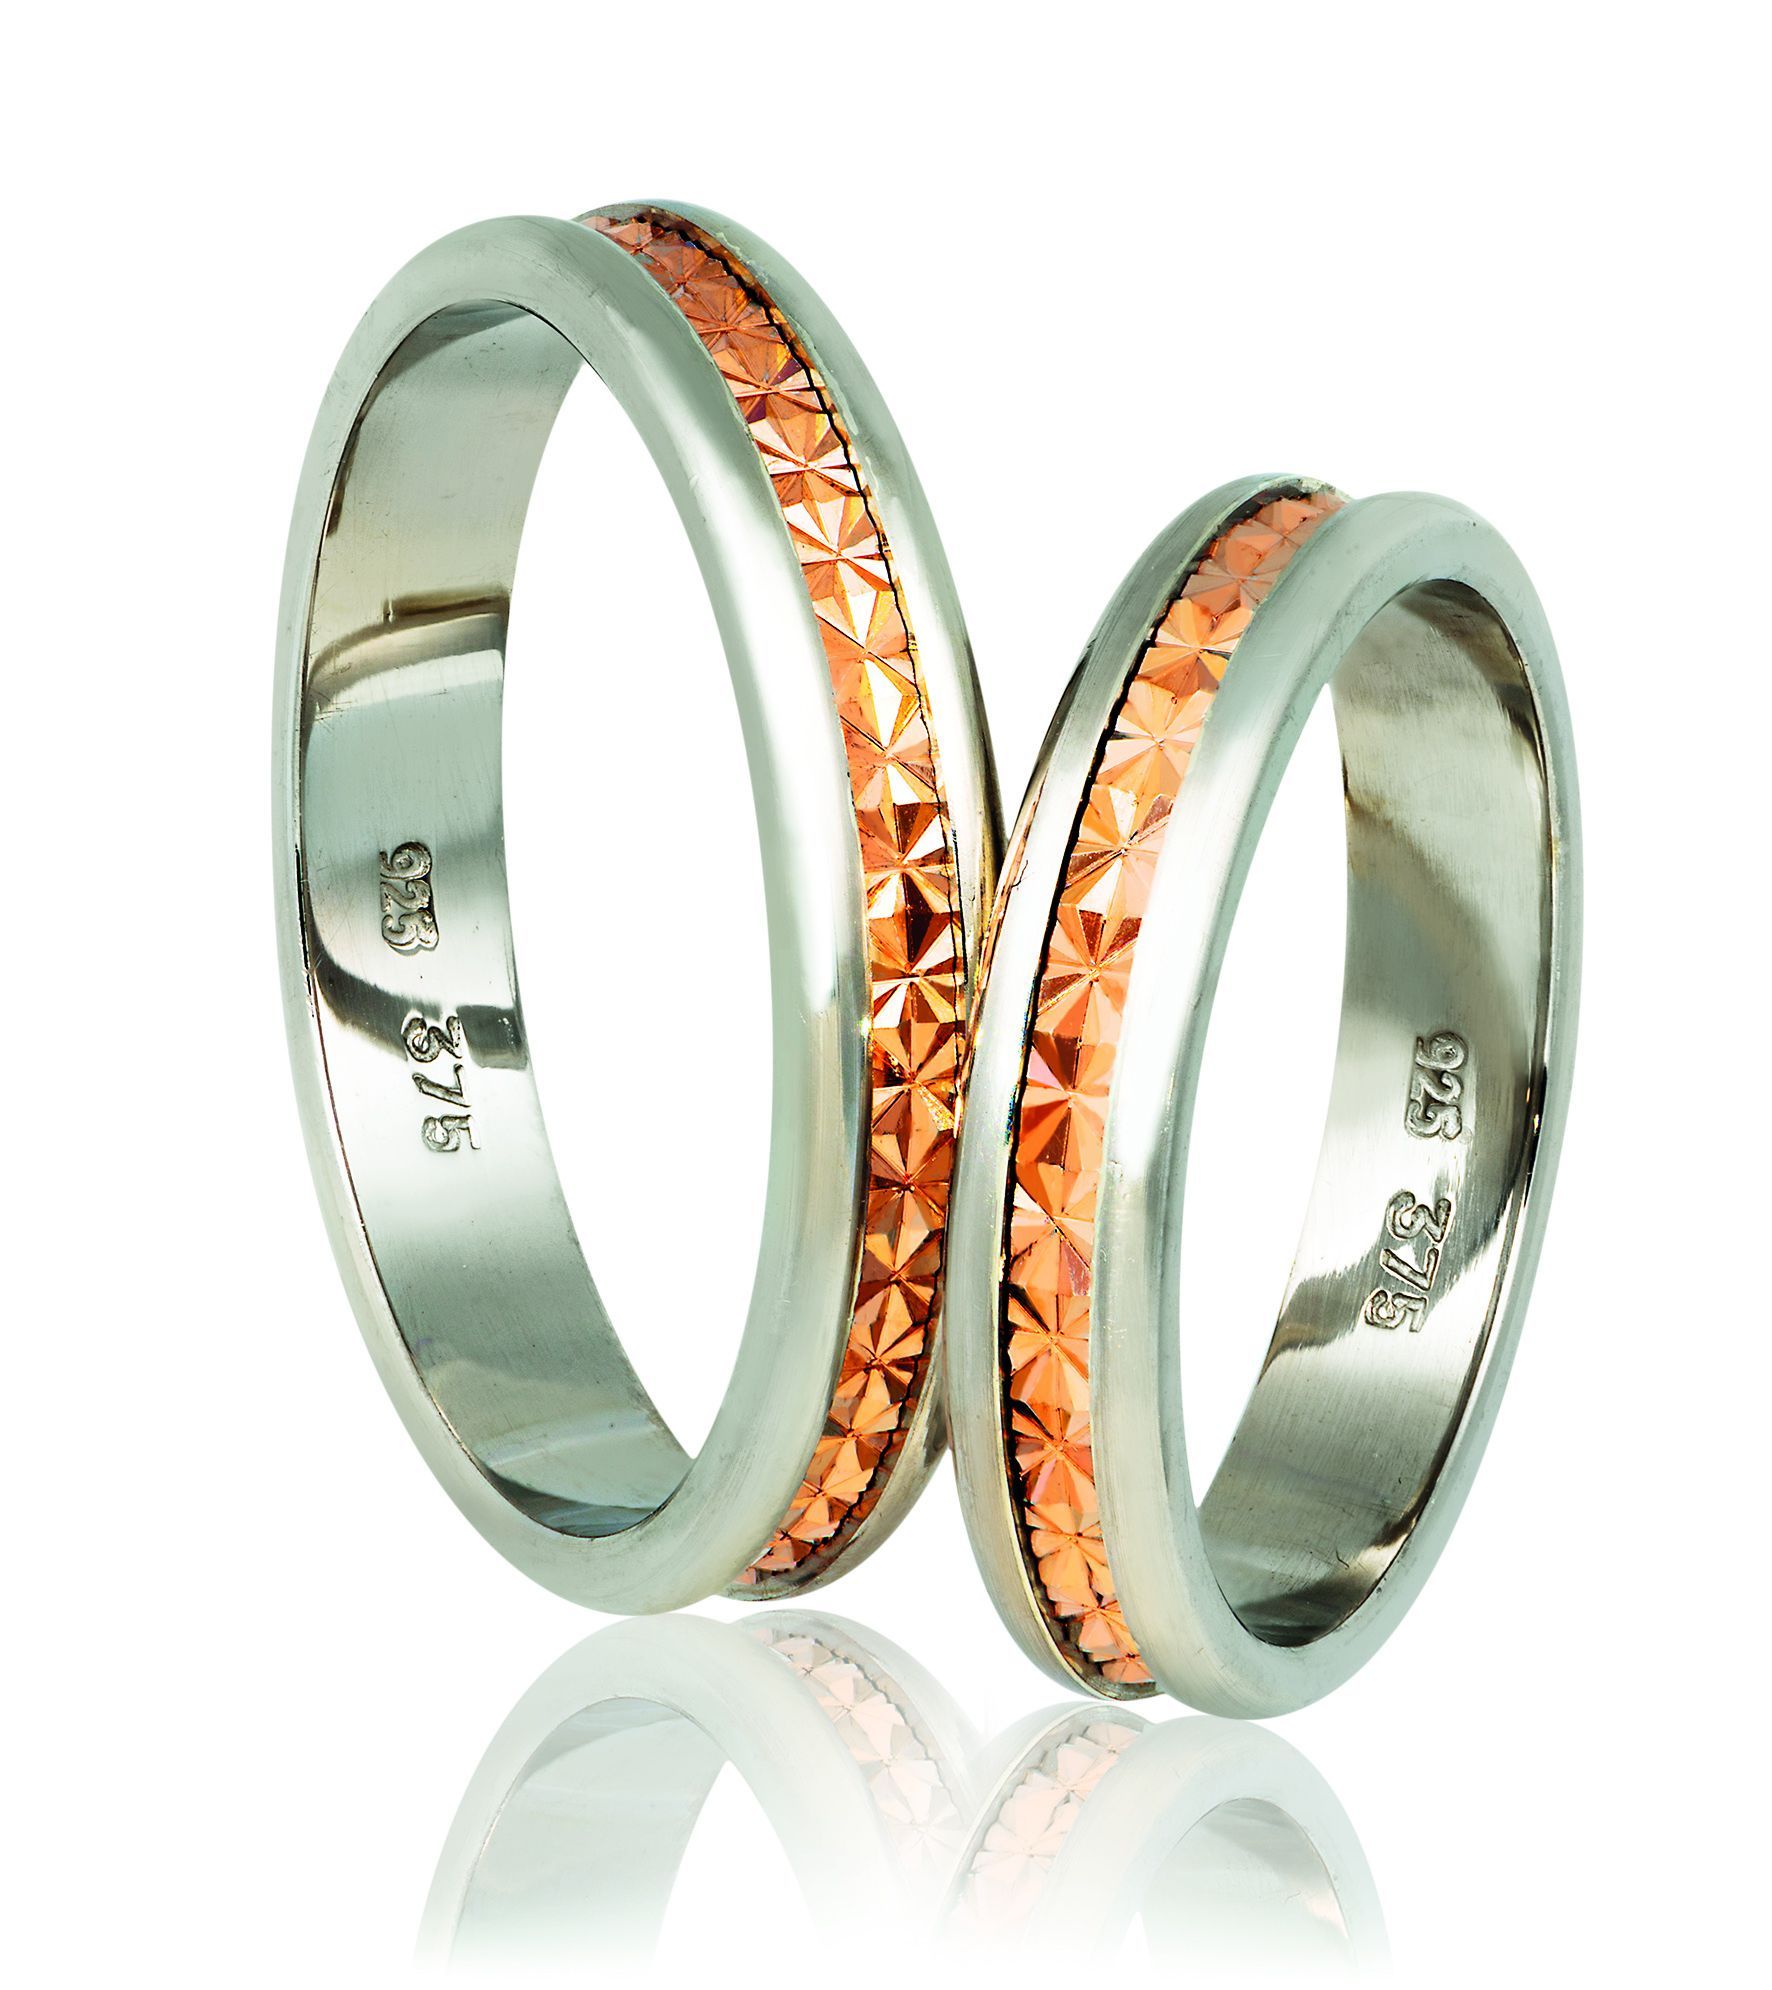 White gold & rose gold wedding rings 4.3mm (code A75r)